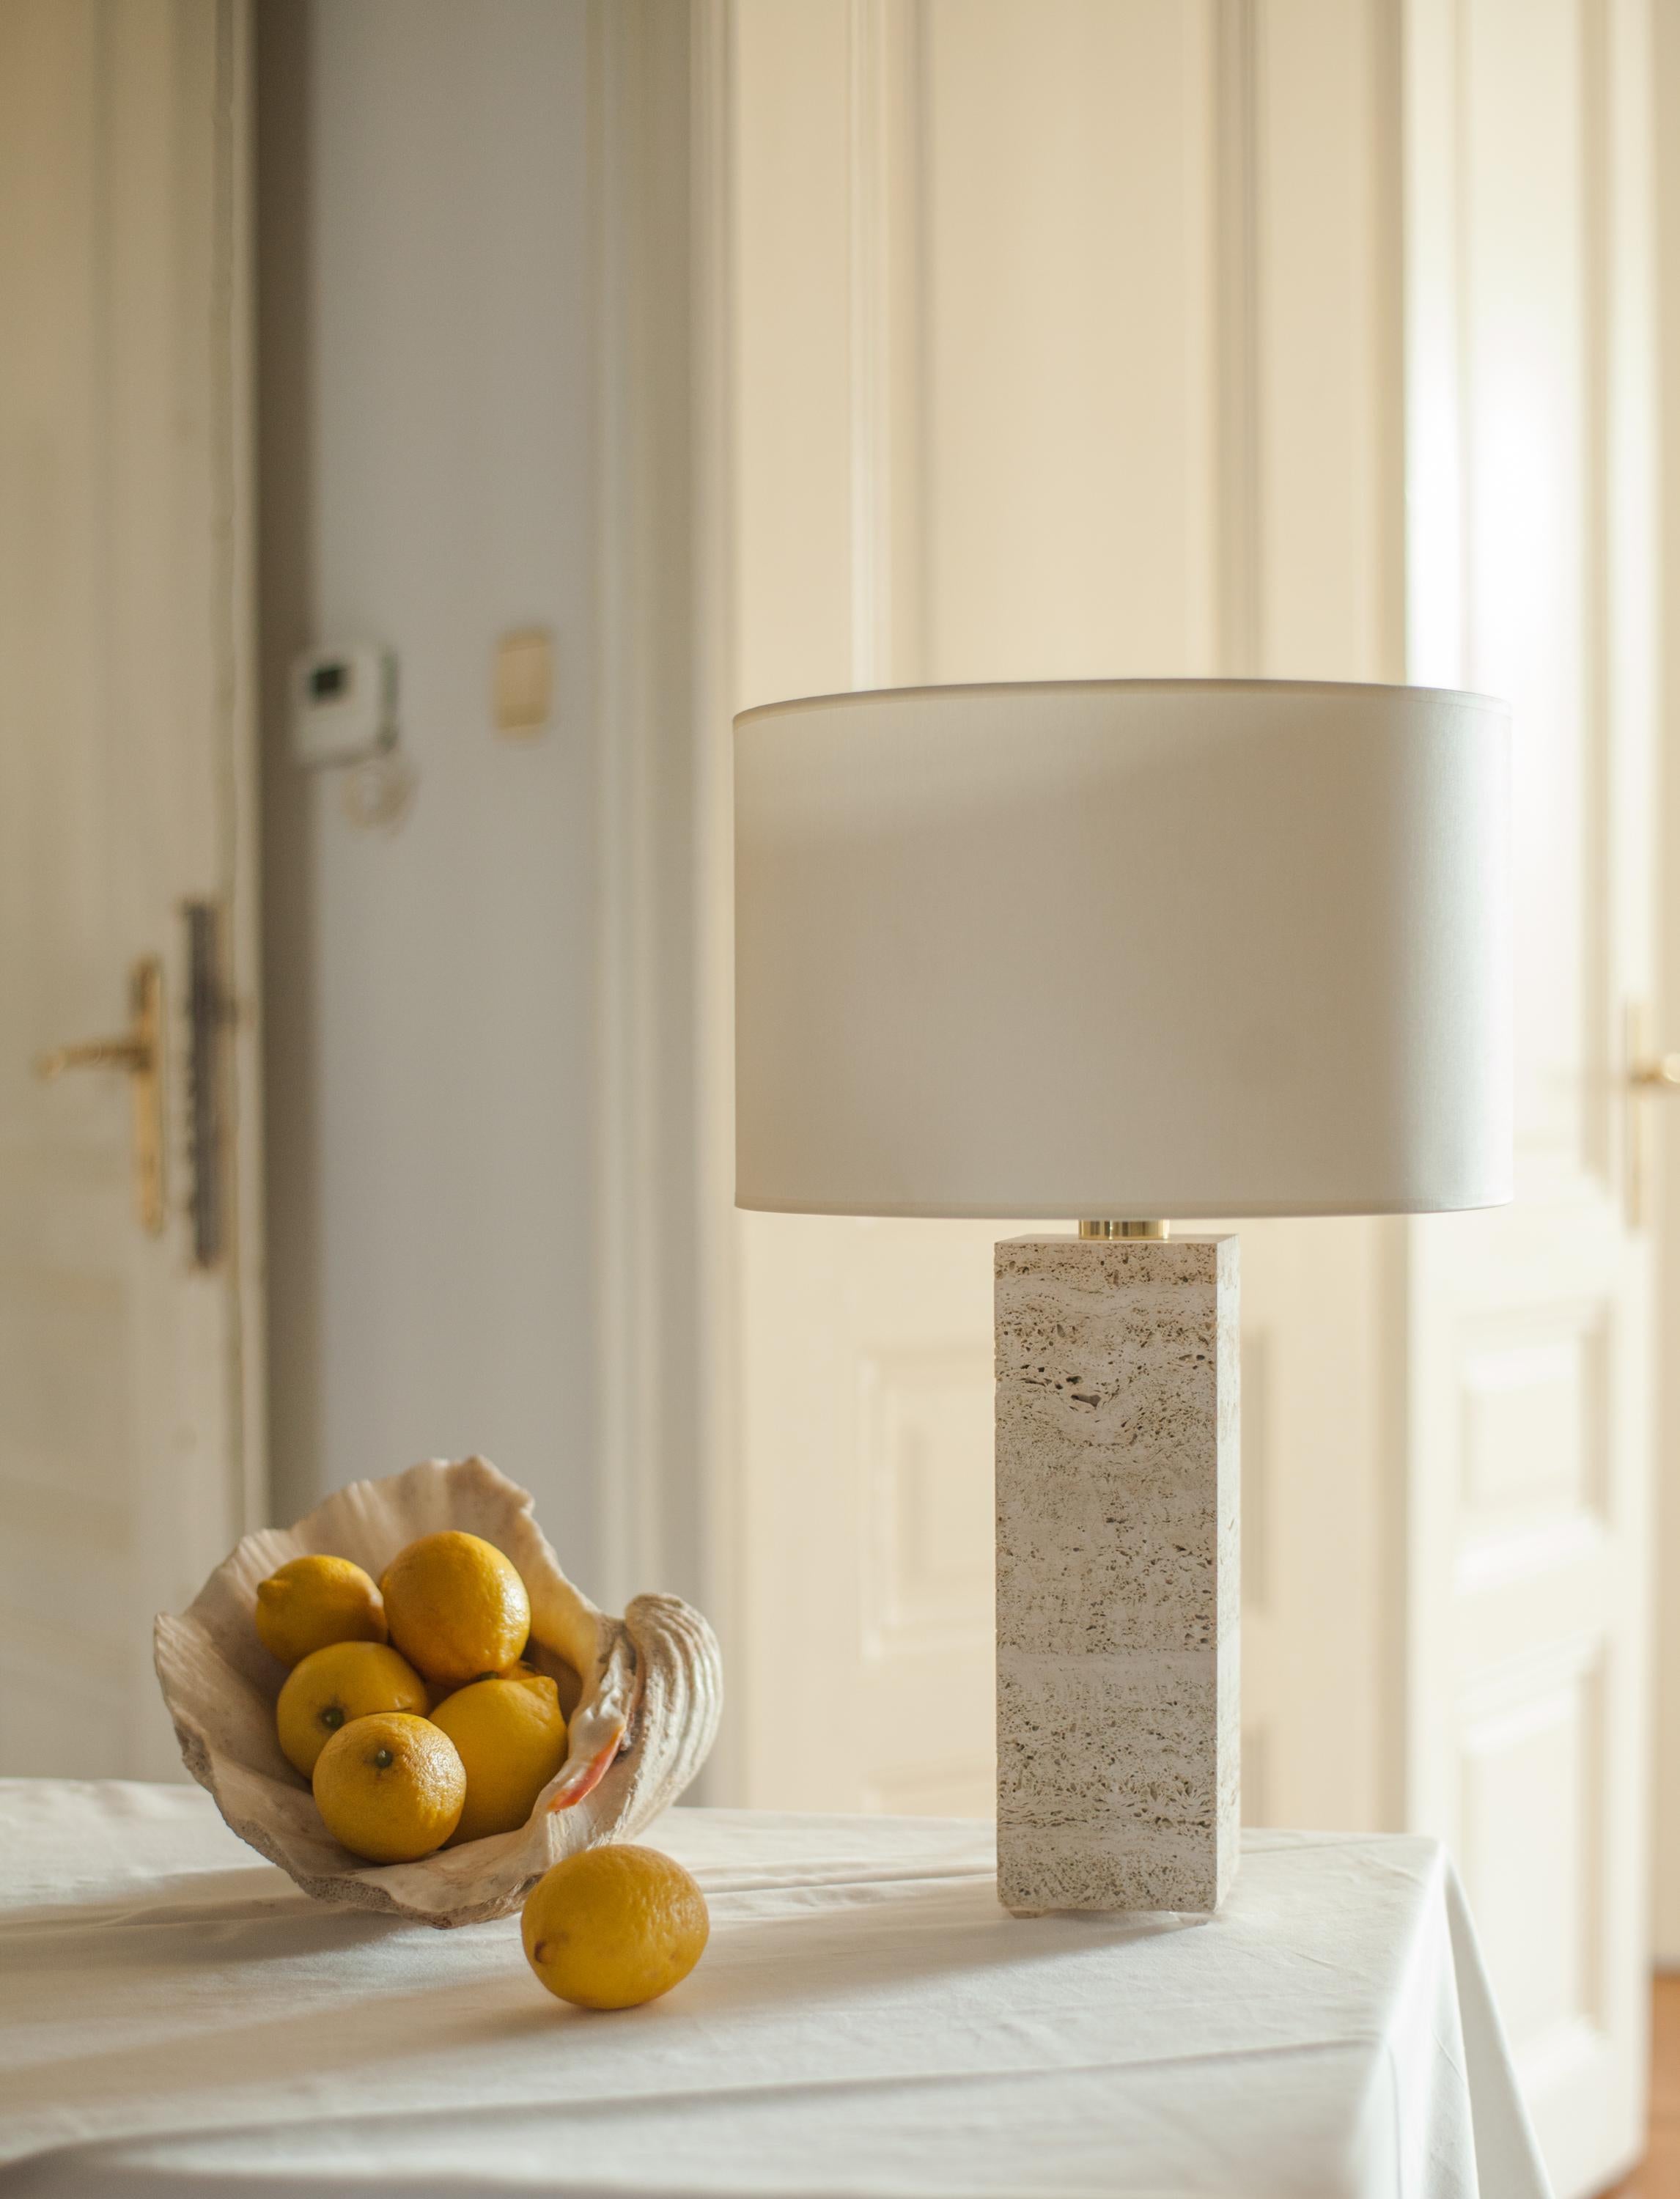 Travertine sculpted table lamp by Brajak Vitberg
CAPRI 1.1.
Travertine, Polished brass
Dimensions: 52 x 35 x 35 cm
White or black cotton lampshade, cotton wiring


Bijelic and Brajak are two architects from Ljubljana, Slovenia.
They are striving to